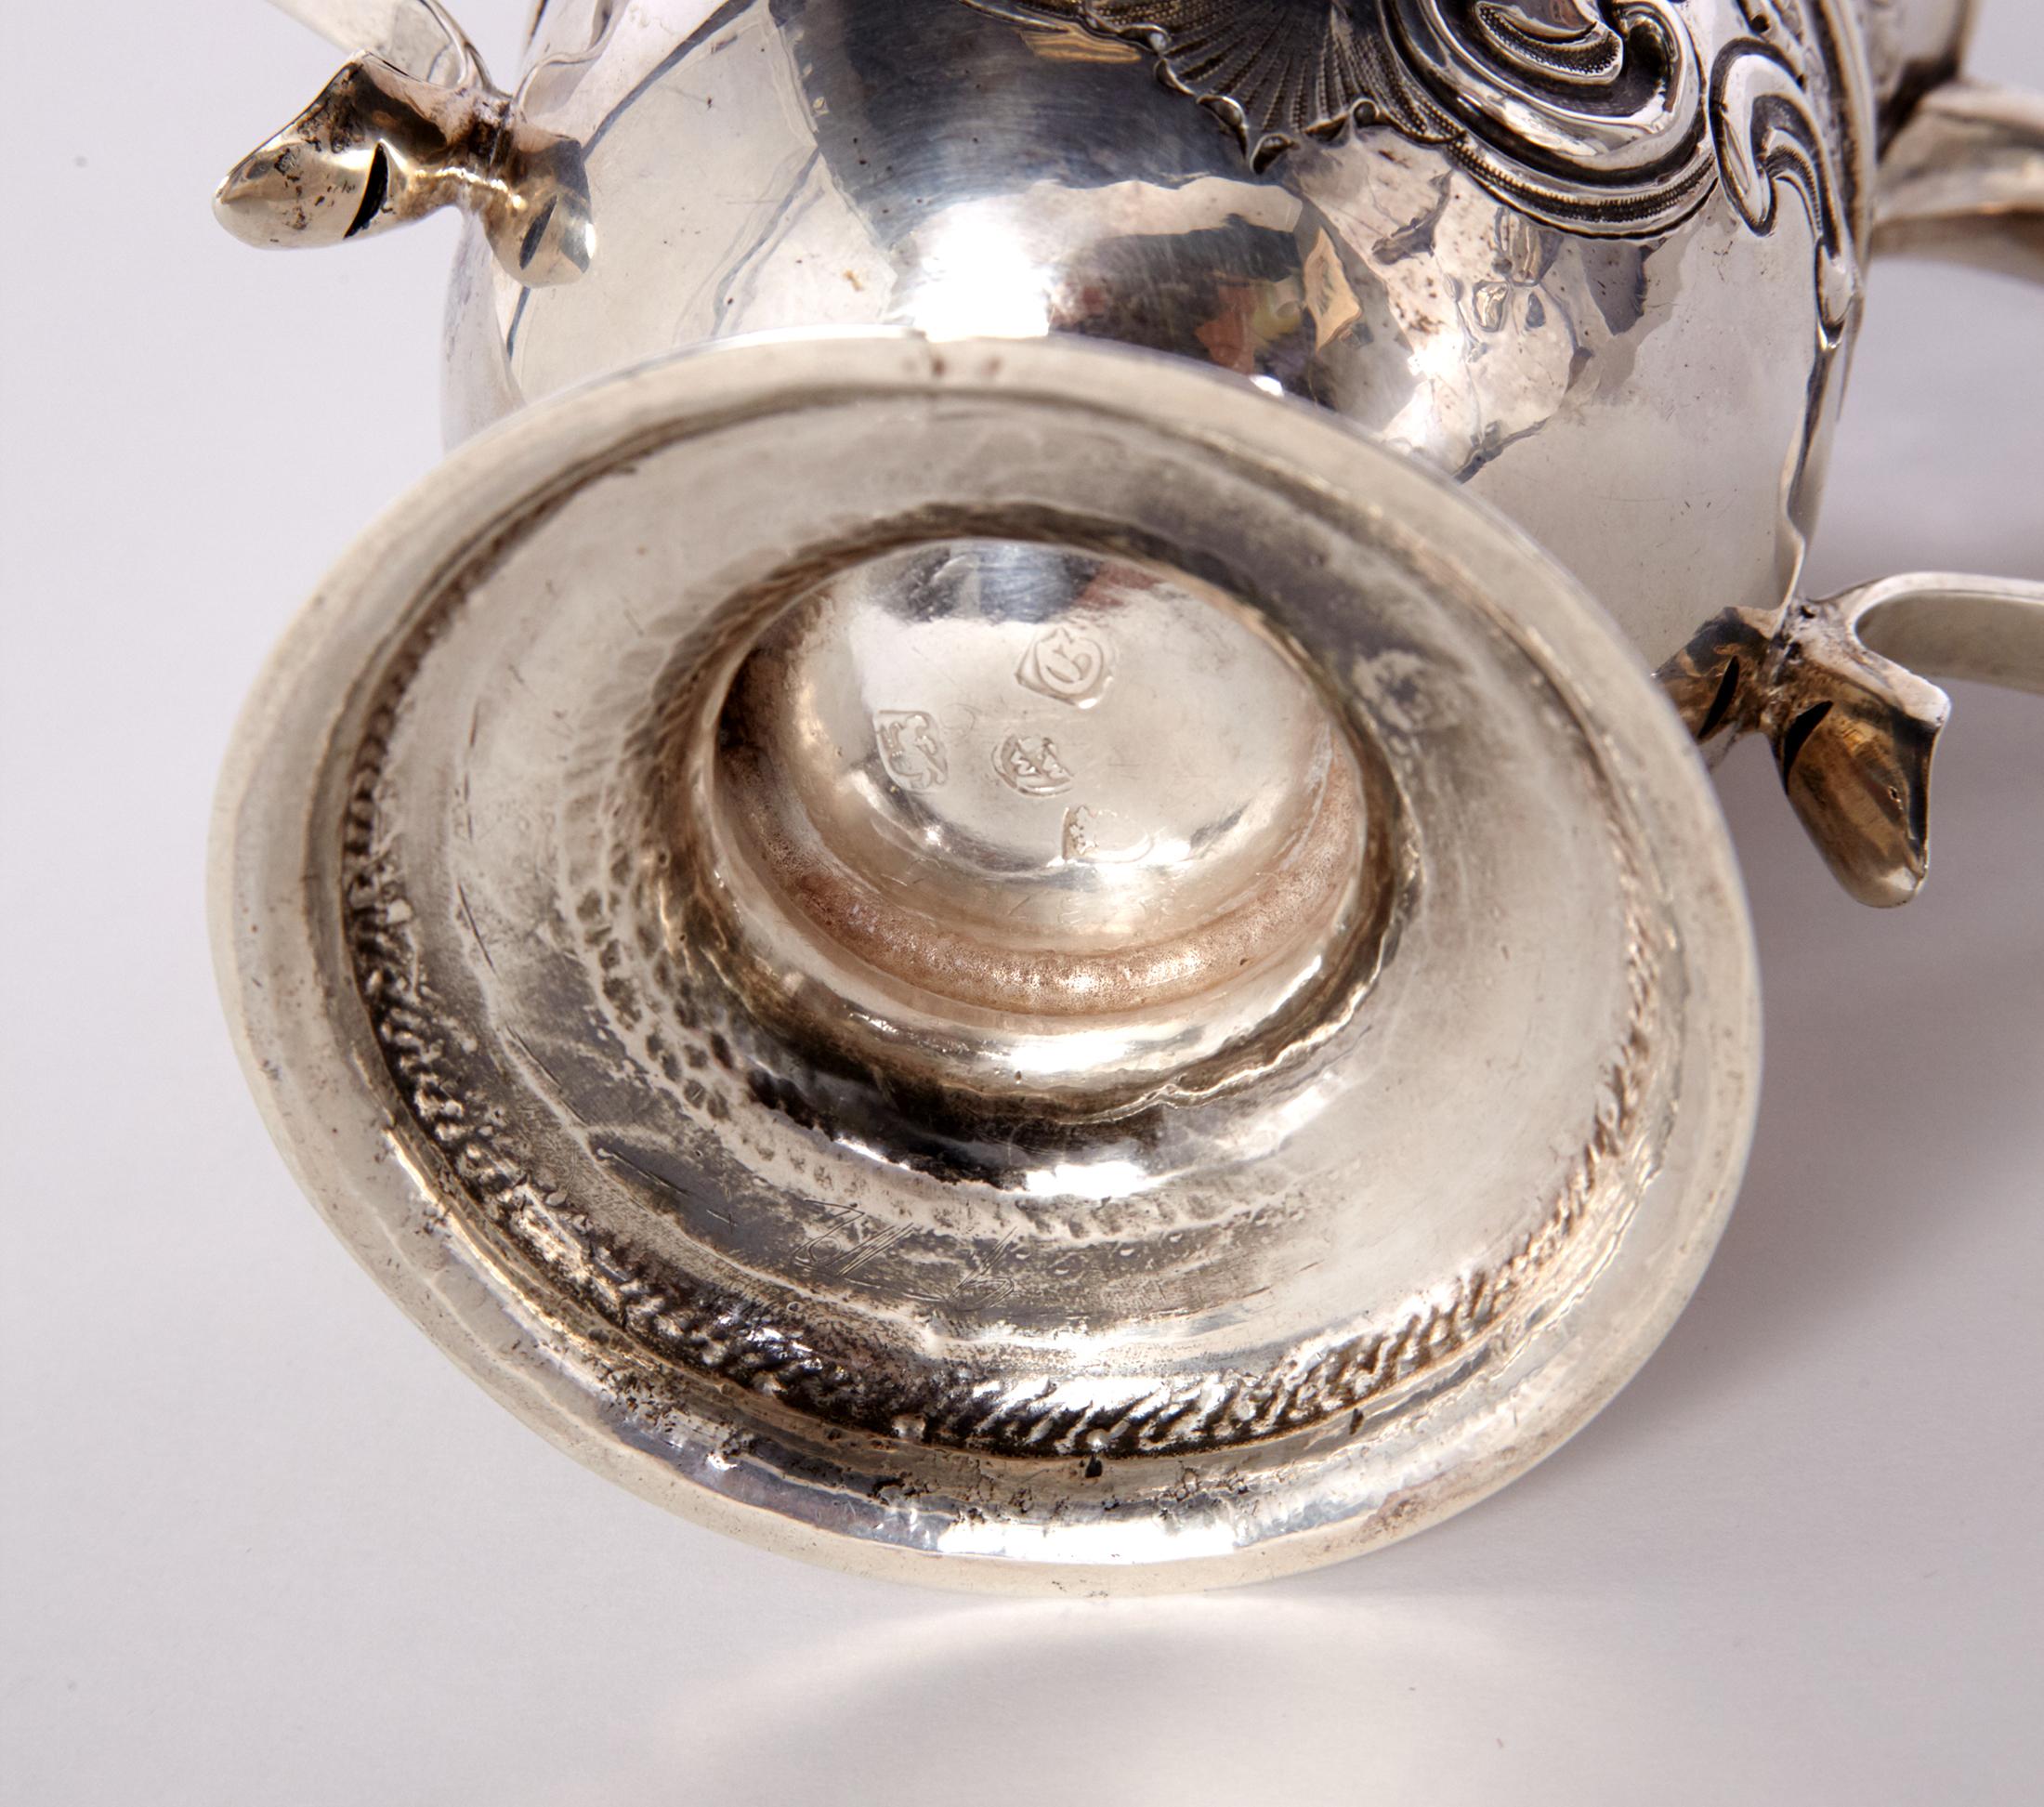 Sterling Silver 2-Handled Loving Cup 1762, London by Thomas Whipham 1